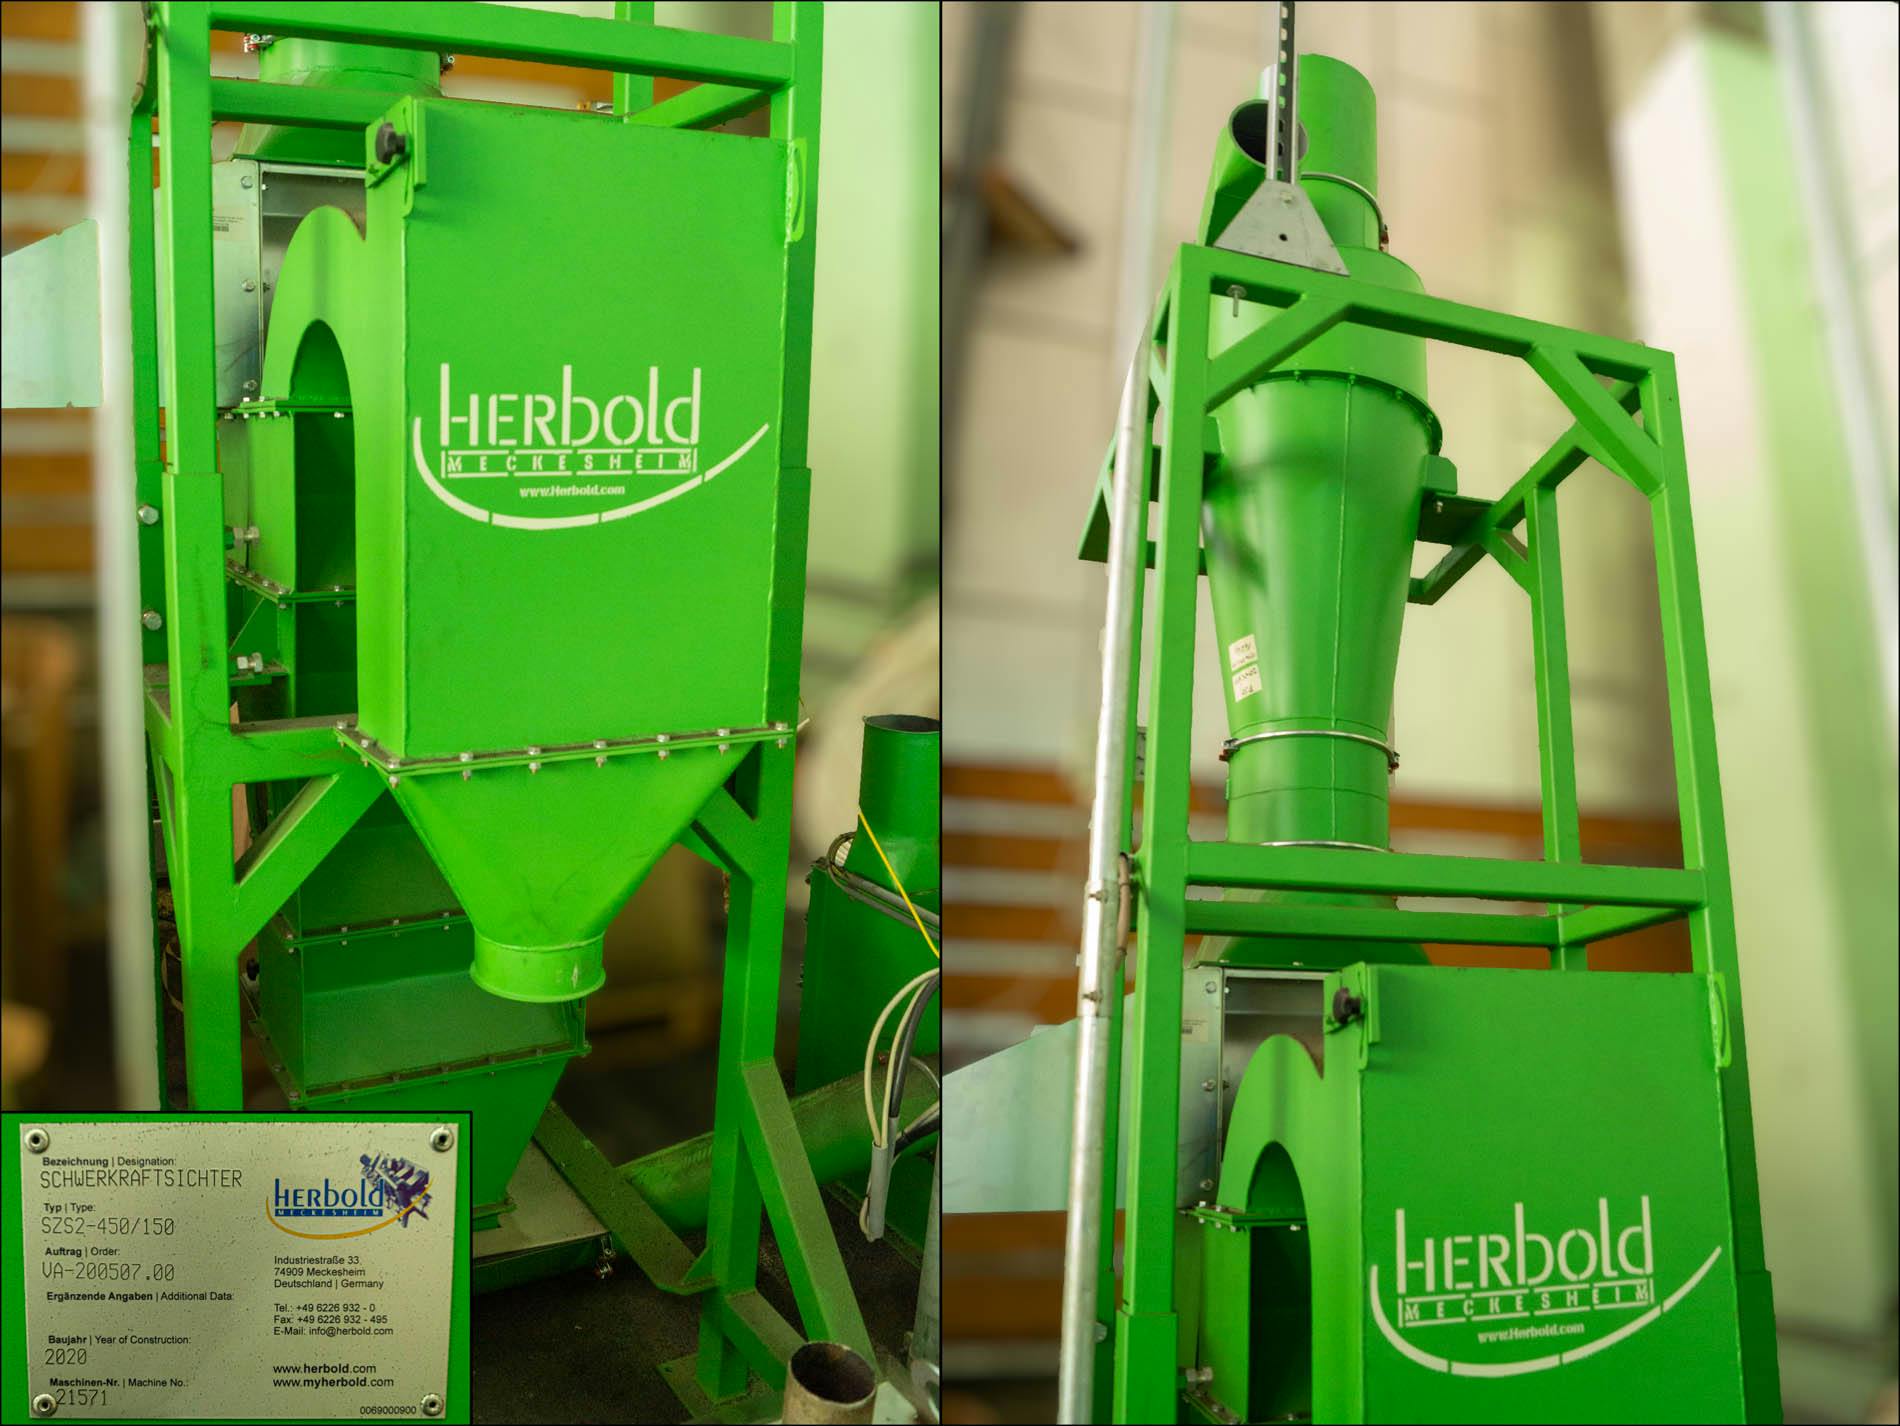 Herbold Complete milling line for plastic - Mlyn Udarowy - image 4